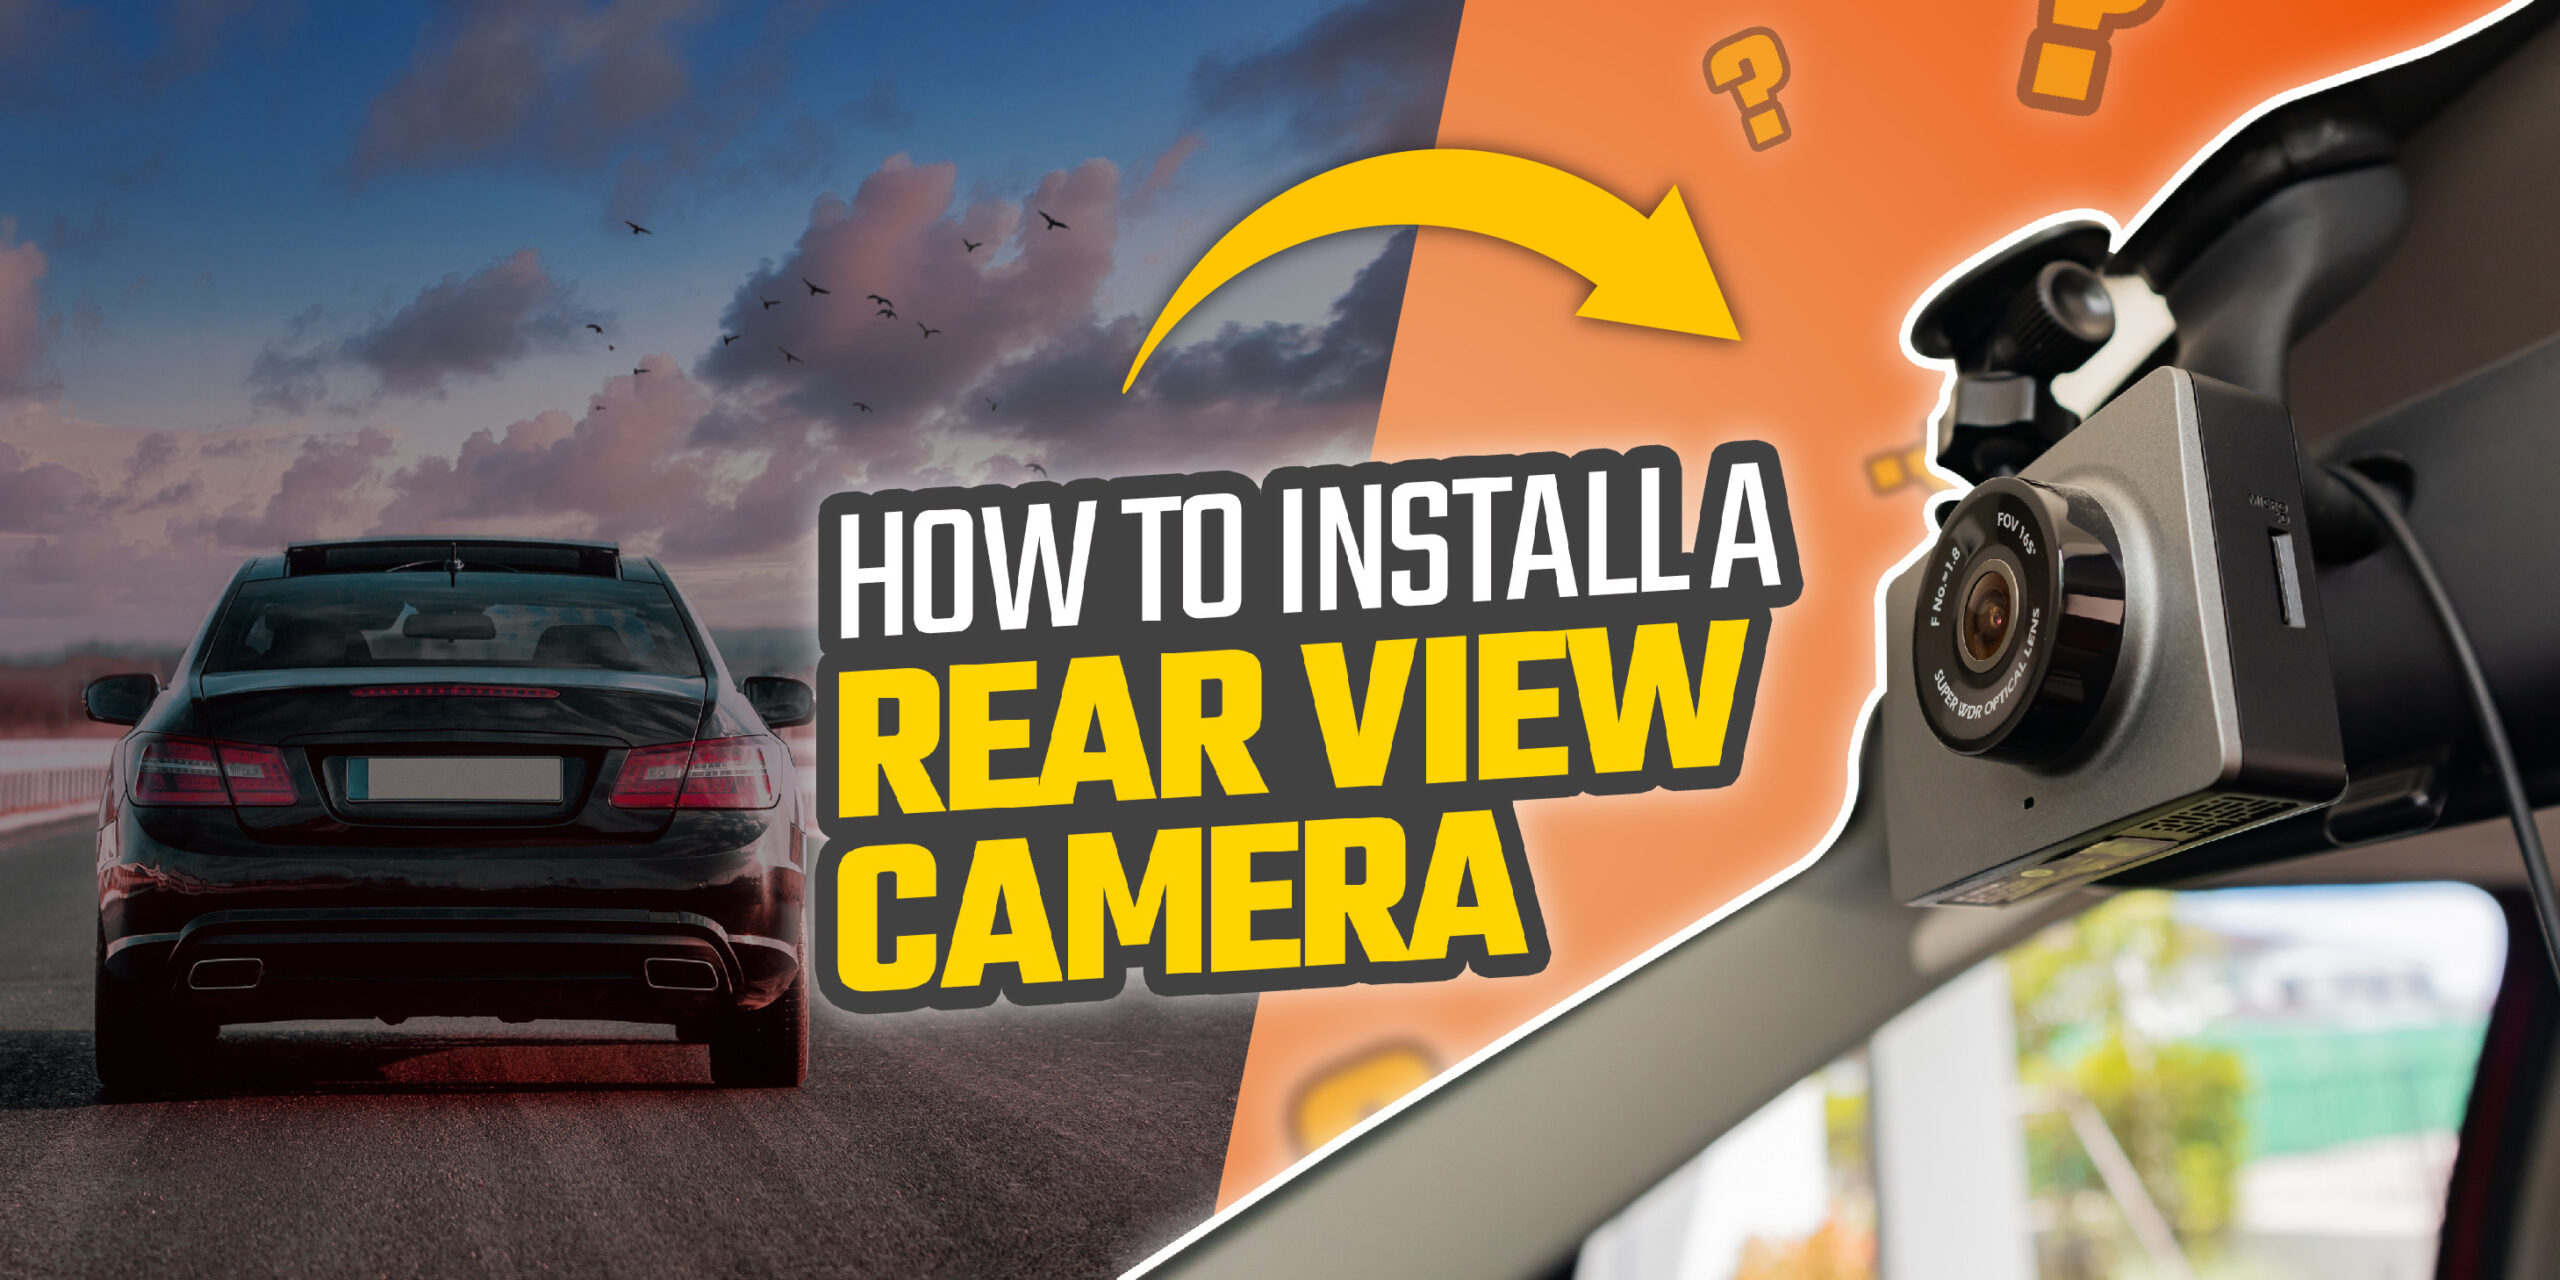 Step-By-Step Guide On How To Install A Rear View Camera